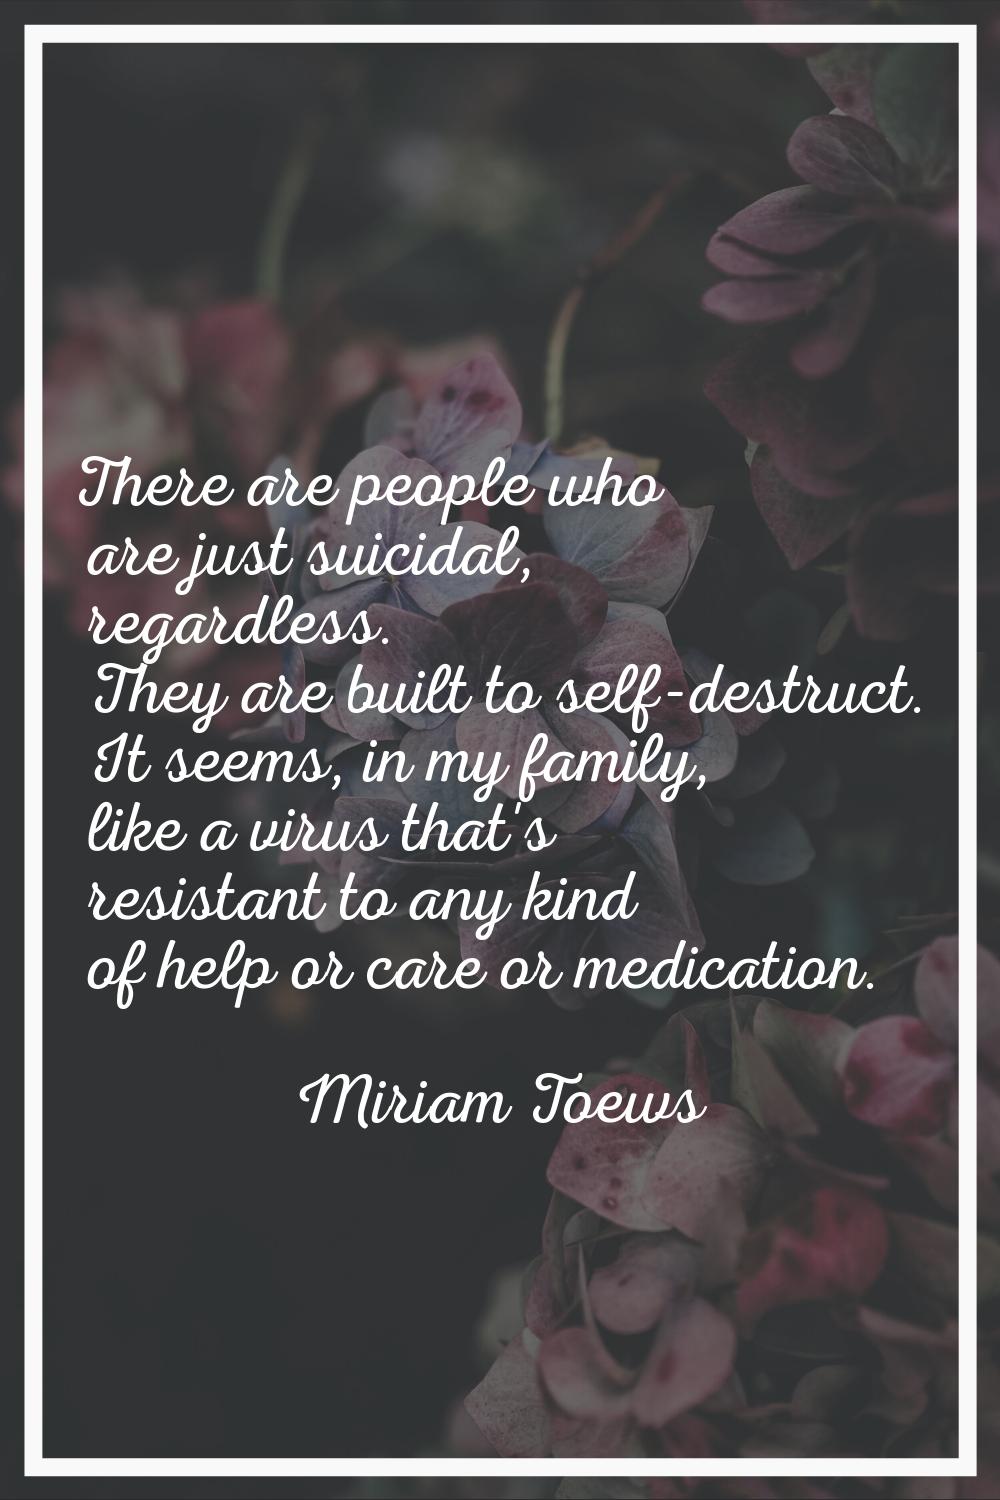 There are people who are just suicidal, regardless. They are built to self-destruct. It seems, in m